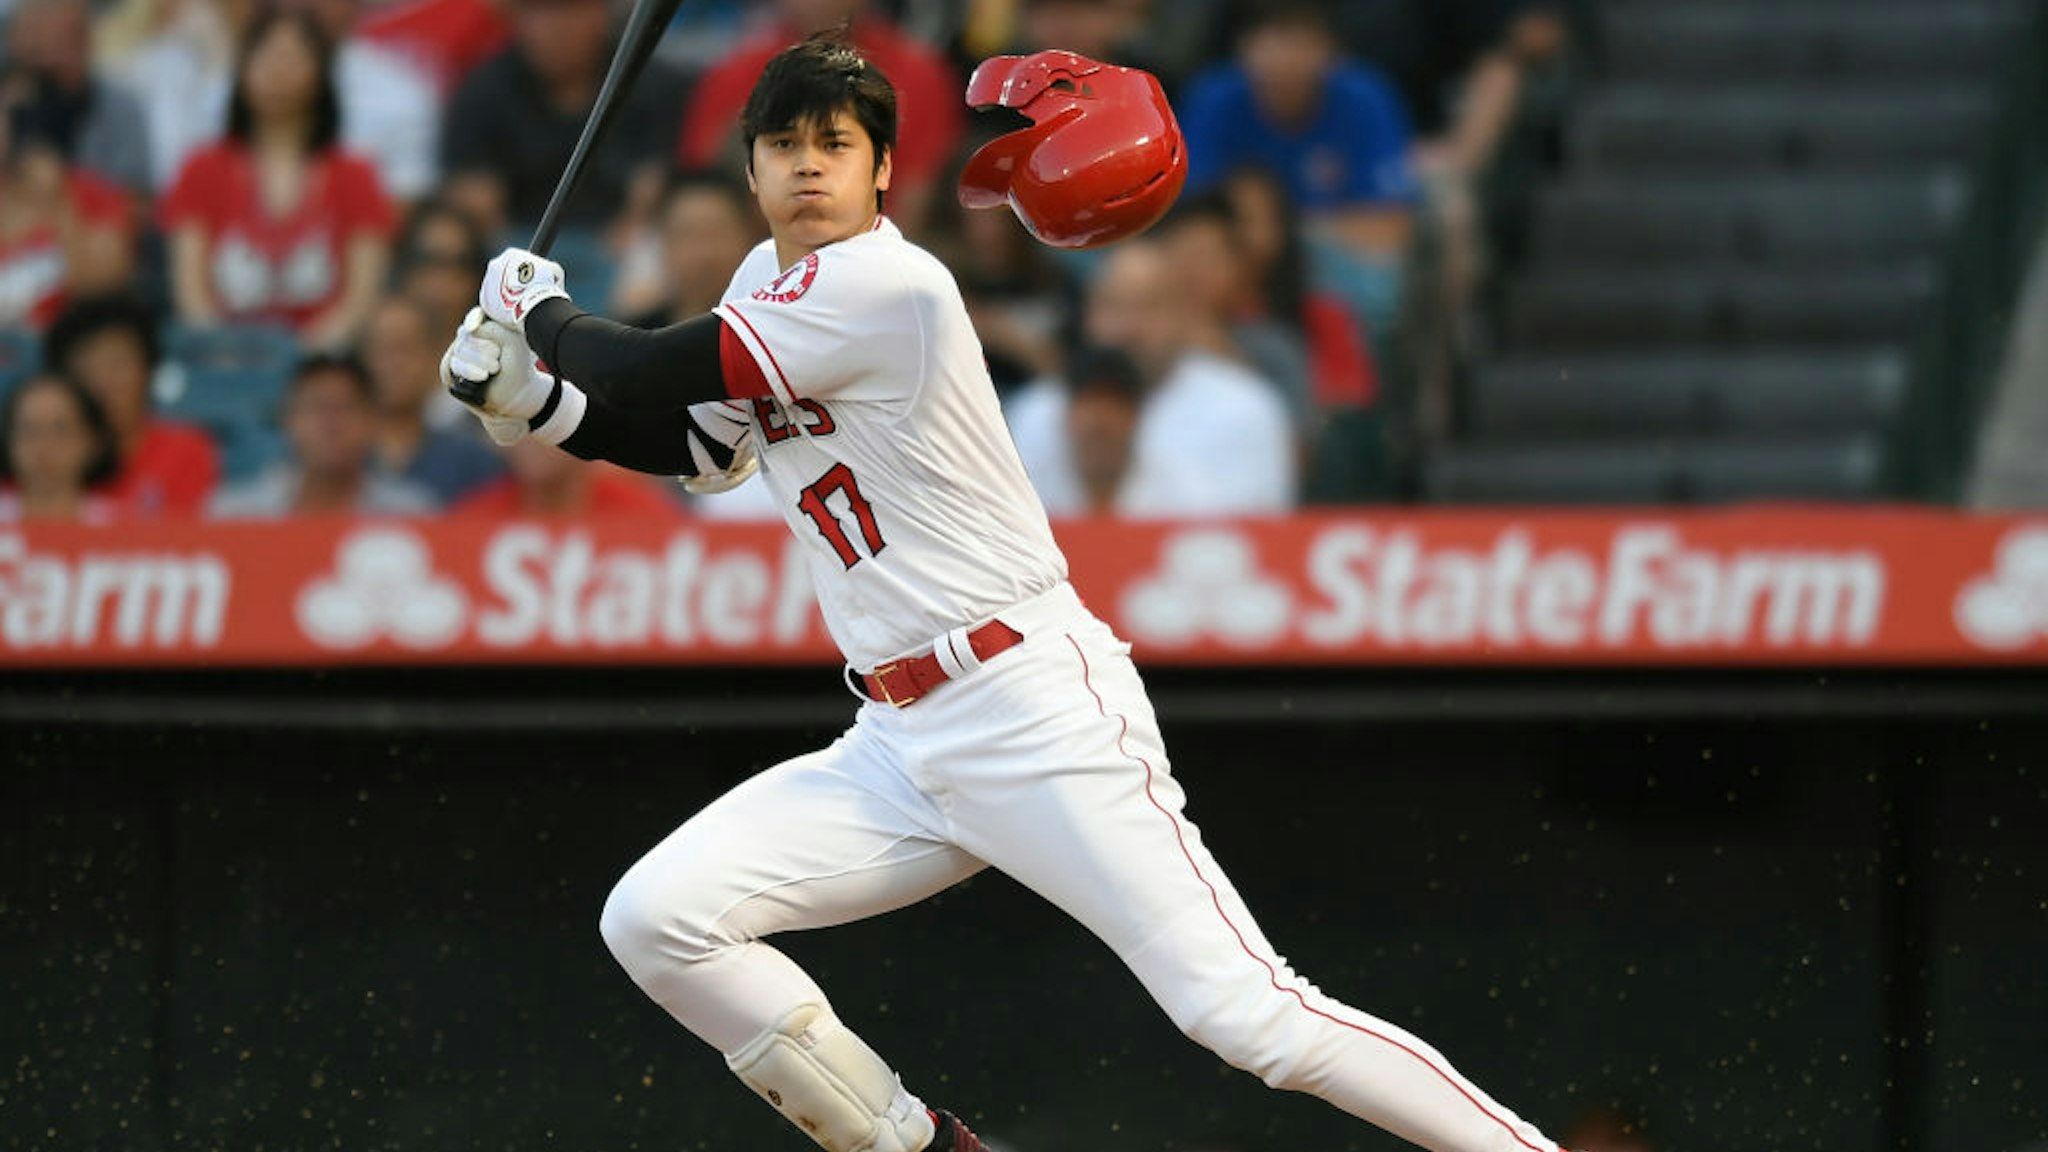 ANAHEIM, CA - JULY 15: Shohei Ohtani #17 of the Los Angeles Angels of Anaheim lost his helmet swinging at a pitch in the first inning against Houston Astrosat Angel Stadium of Anaheim on July 15, 2019 in Anaheim, California. (Photo by John McCoy/Getty Images)